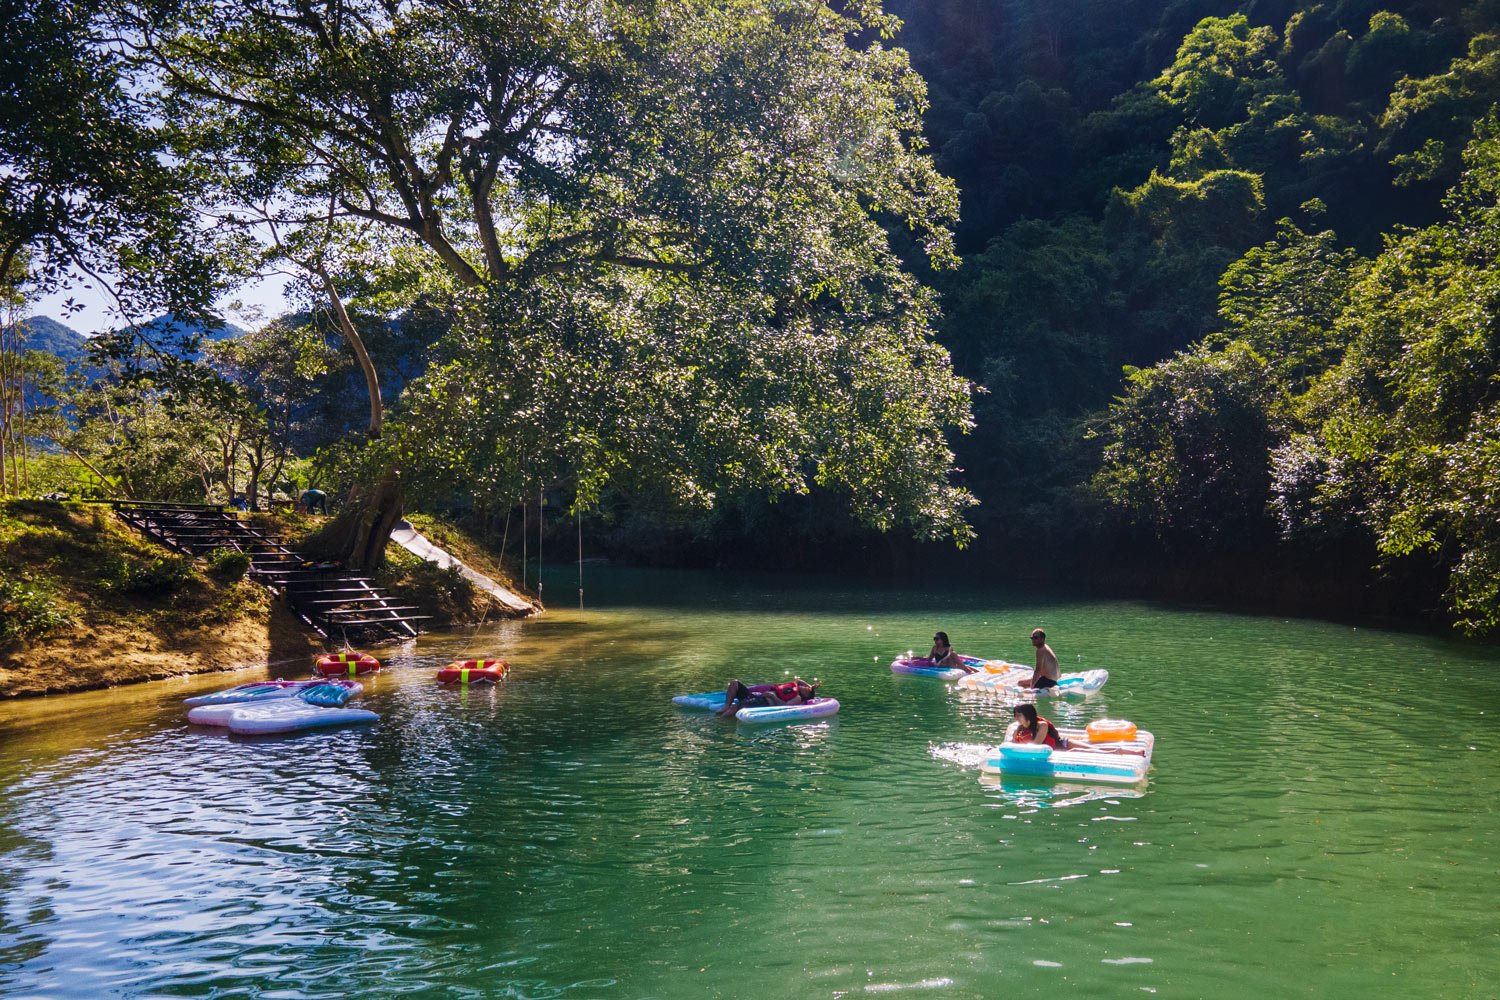 Blue River is an ideal destination for experiencing fun, cooling off, and creating unforgettable memories.